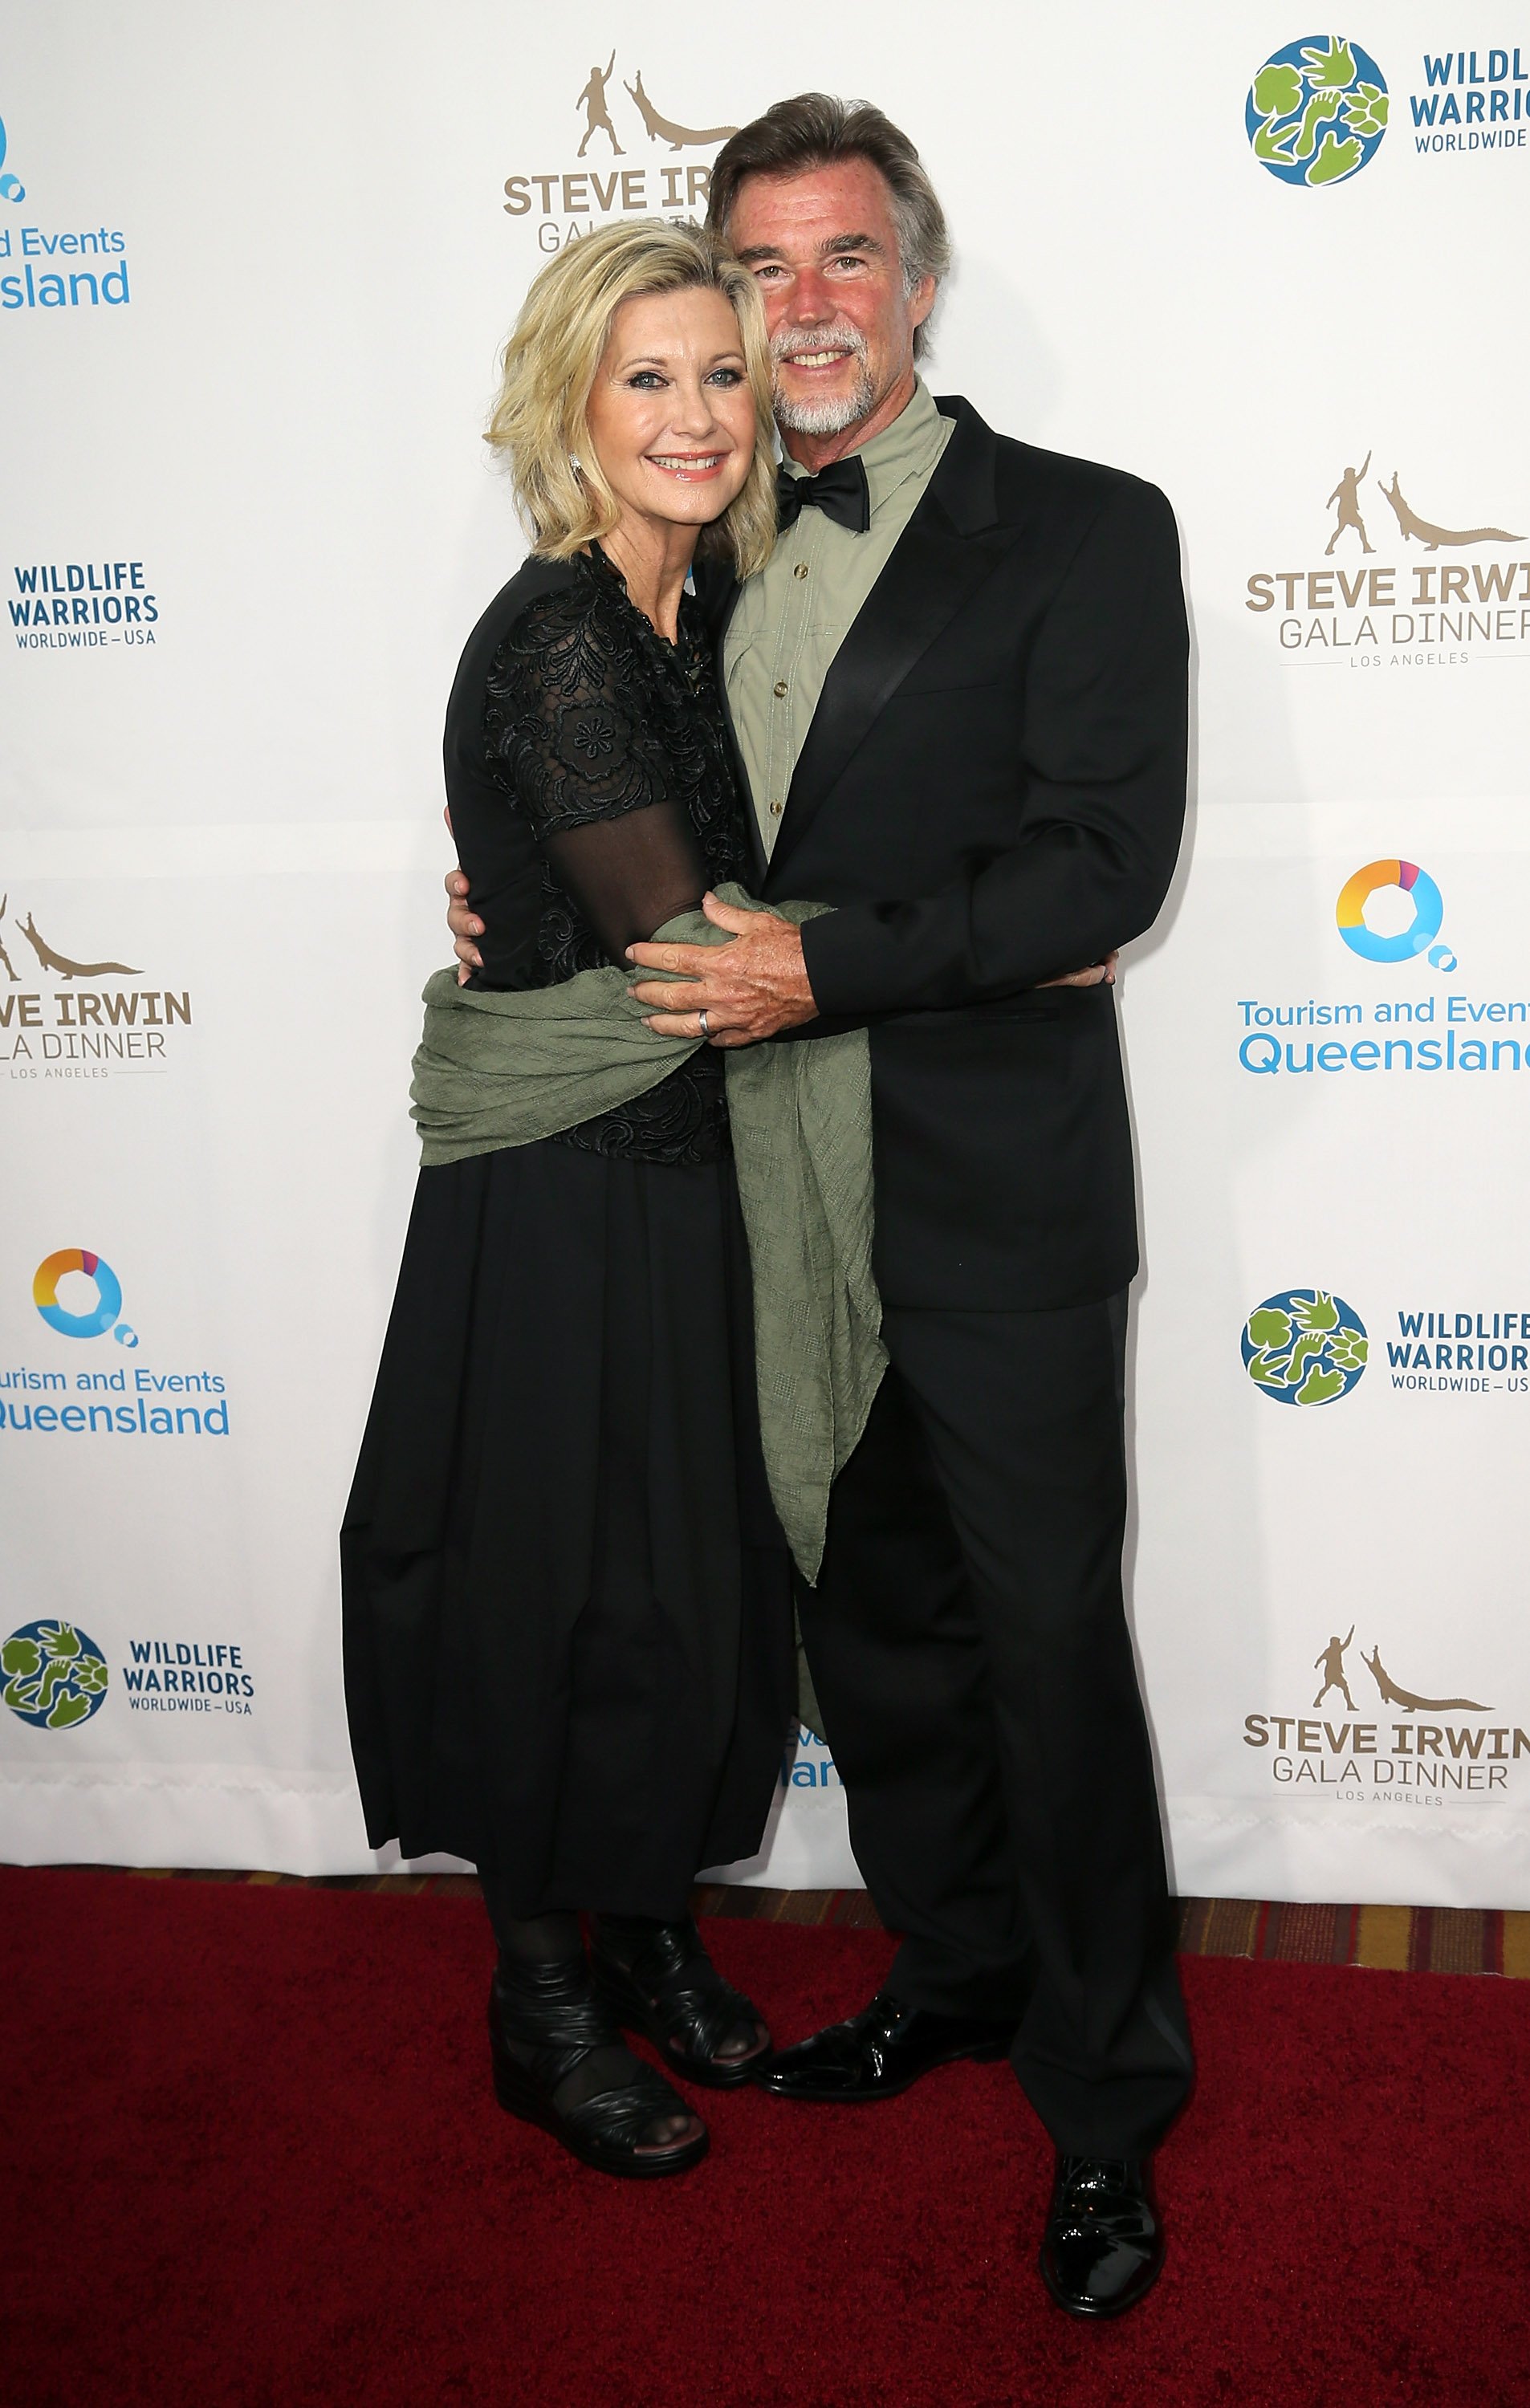 Olivia Newton-John and her husband John Easterling attend the Steve Irwin Gala Dinner at JW Marriott Los Angeles at L.A. LIVE on May 21, 2016, in Los Angeles, California. | Source: Getty Images